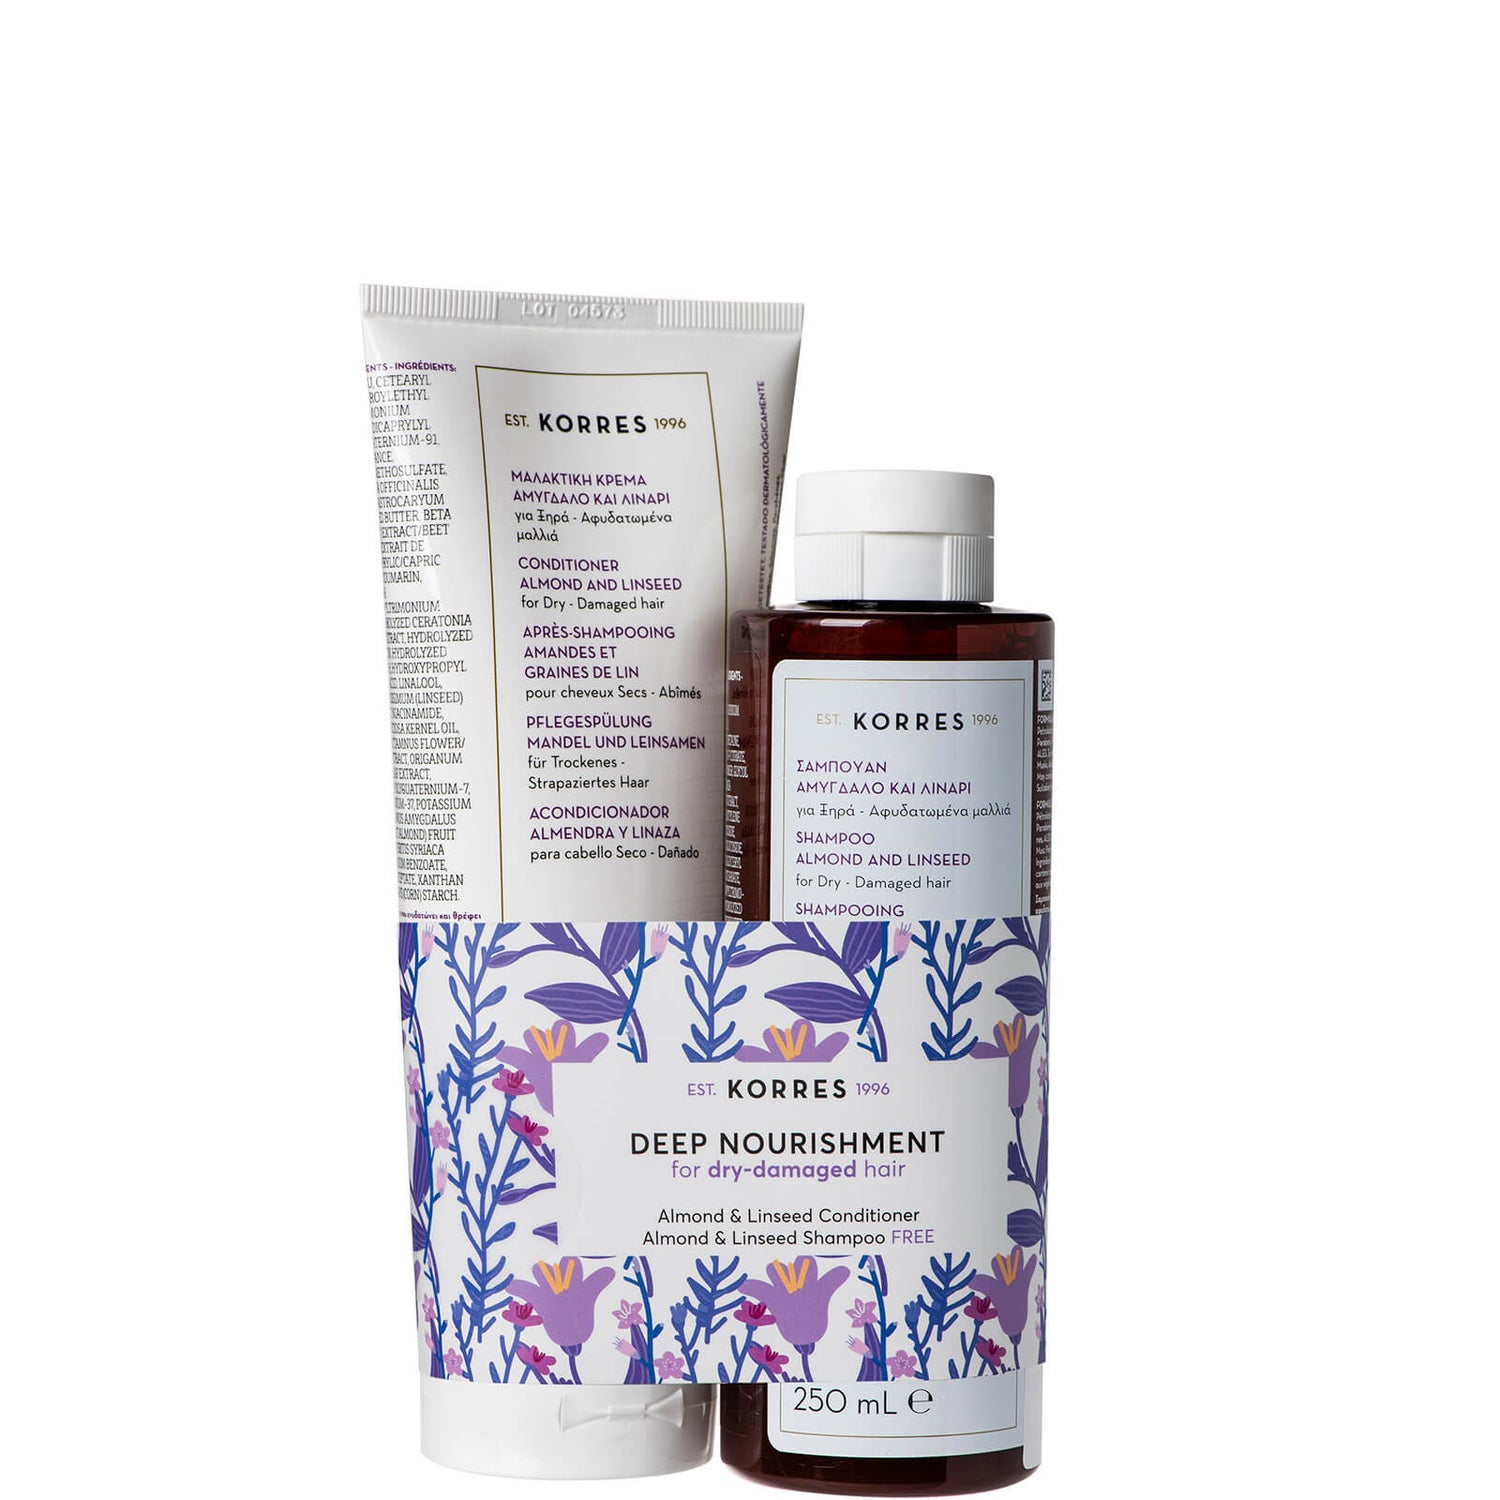 KORRES Almond & Linseed Kit Conditioner and Shampoo Duo (Worth £31.00)